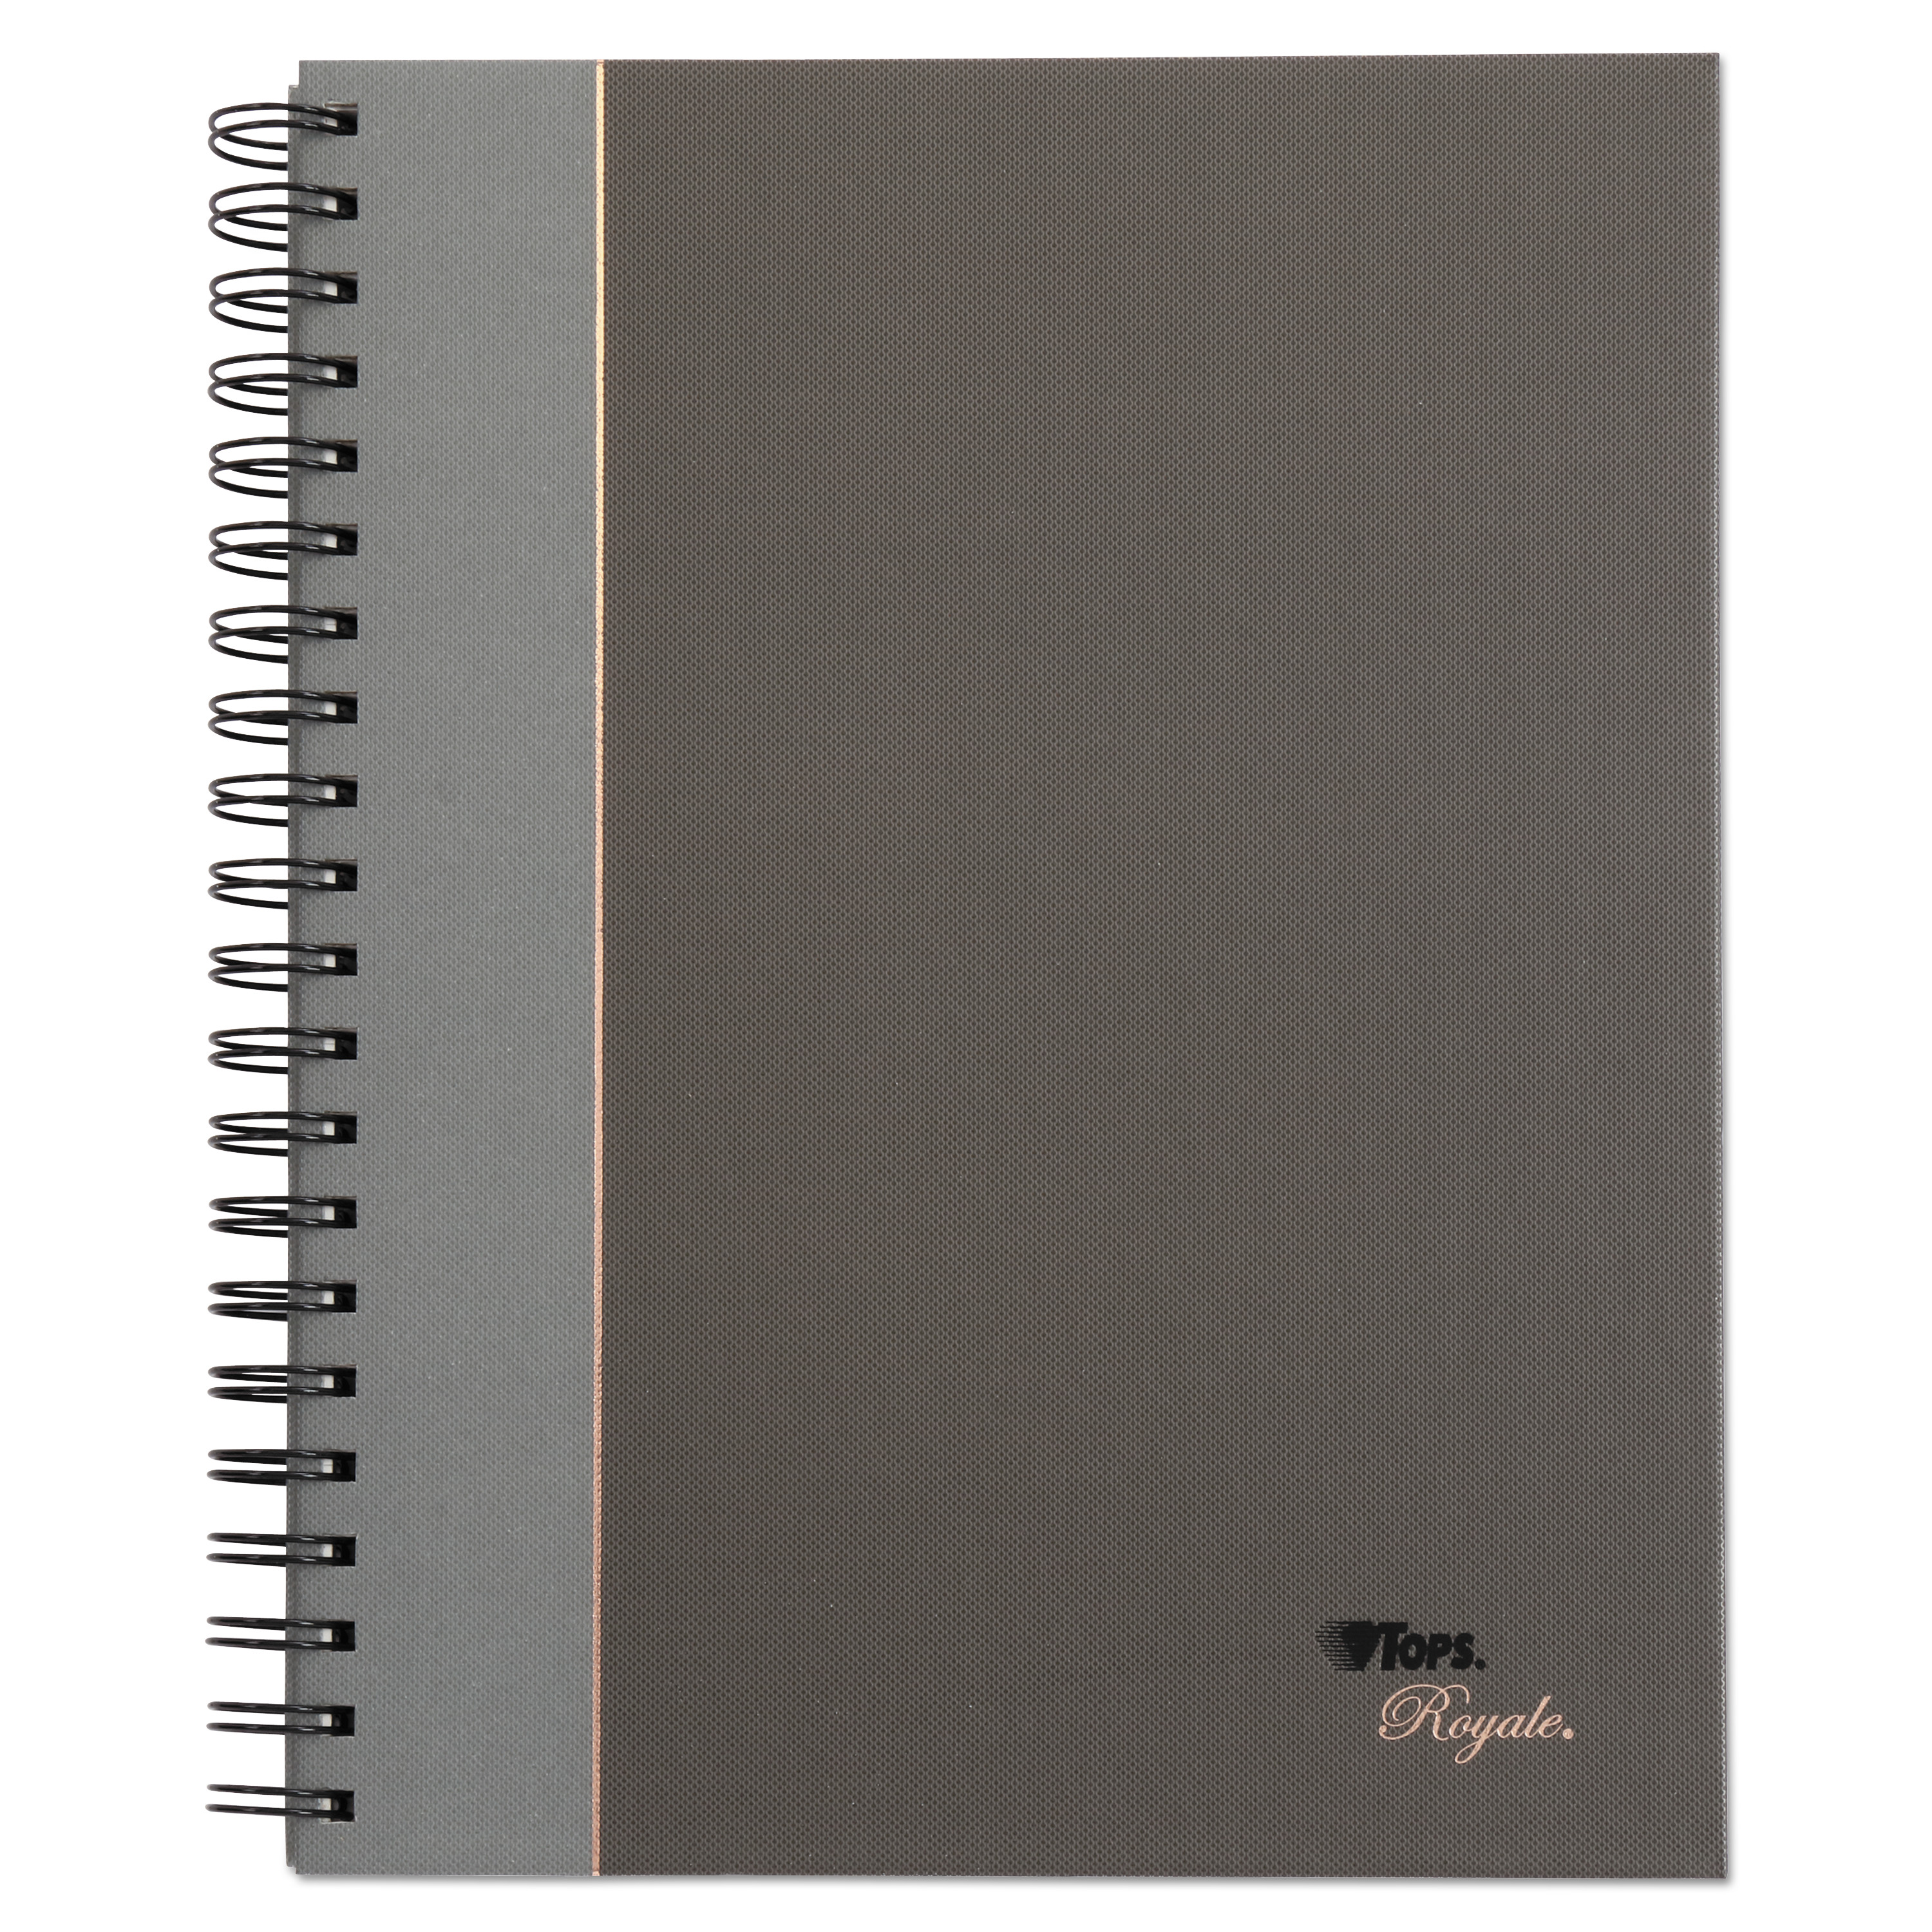  TOPS 25330 Royale Wirebound Business Notebook, College, Black/Gray, 8.25 x 5.88, 96 Sheets (TOP25330) 